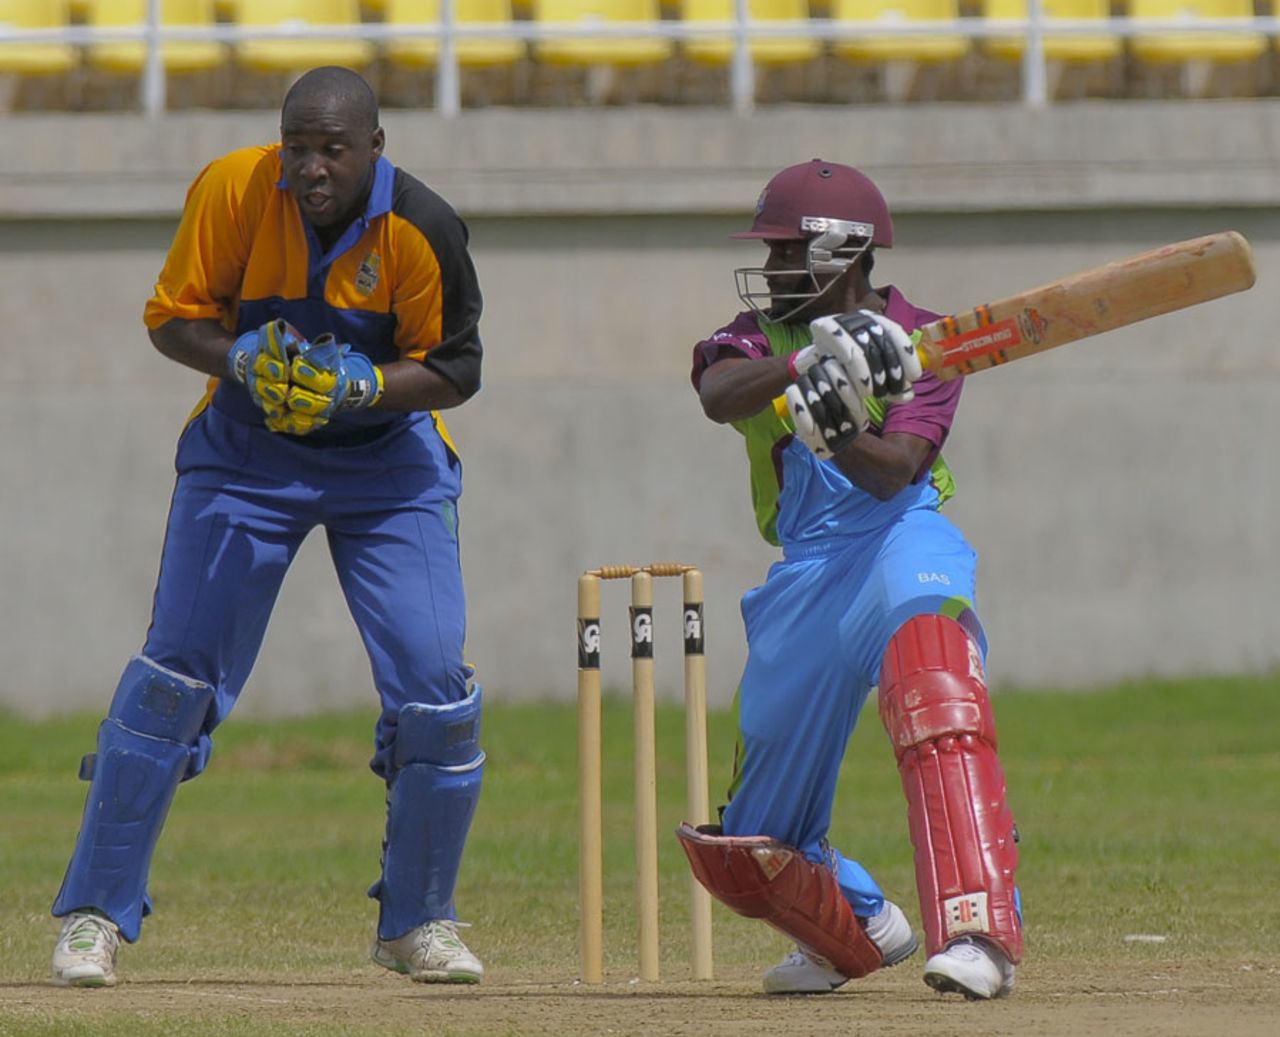 Rajendra Chandrika scores through the off side during his half-century, Barbados v Sagicor High Performance Centre, WICB Cup, Jamaica, October 19, 2010